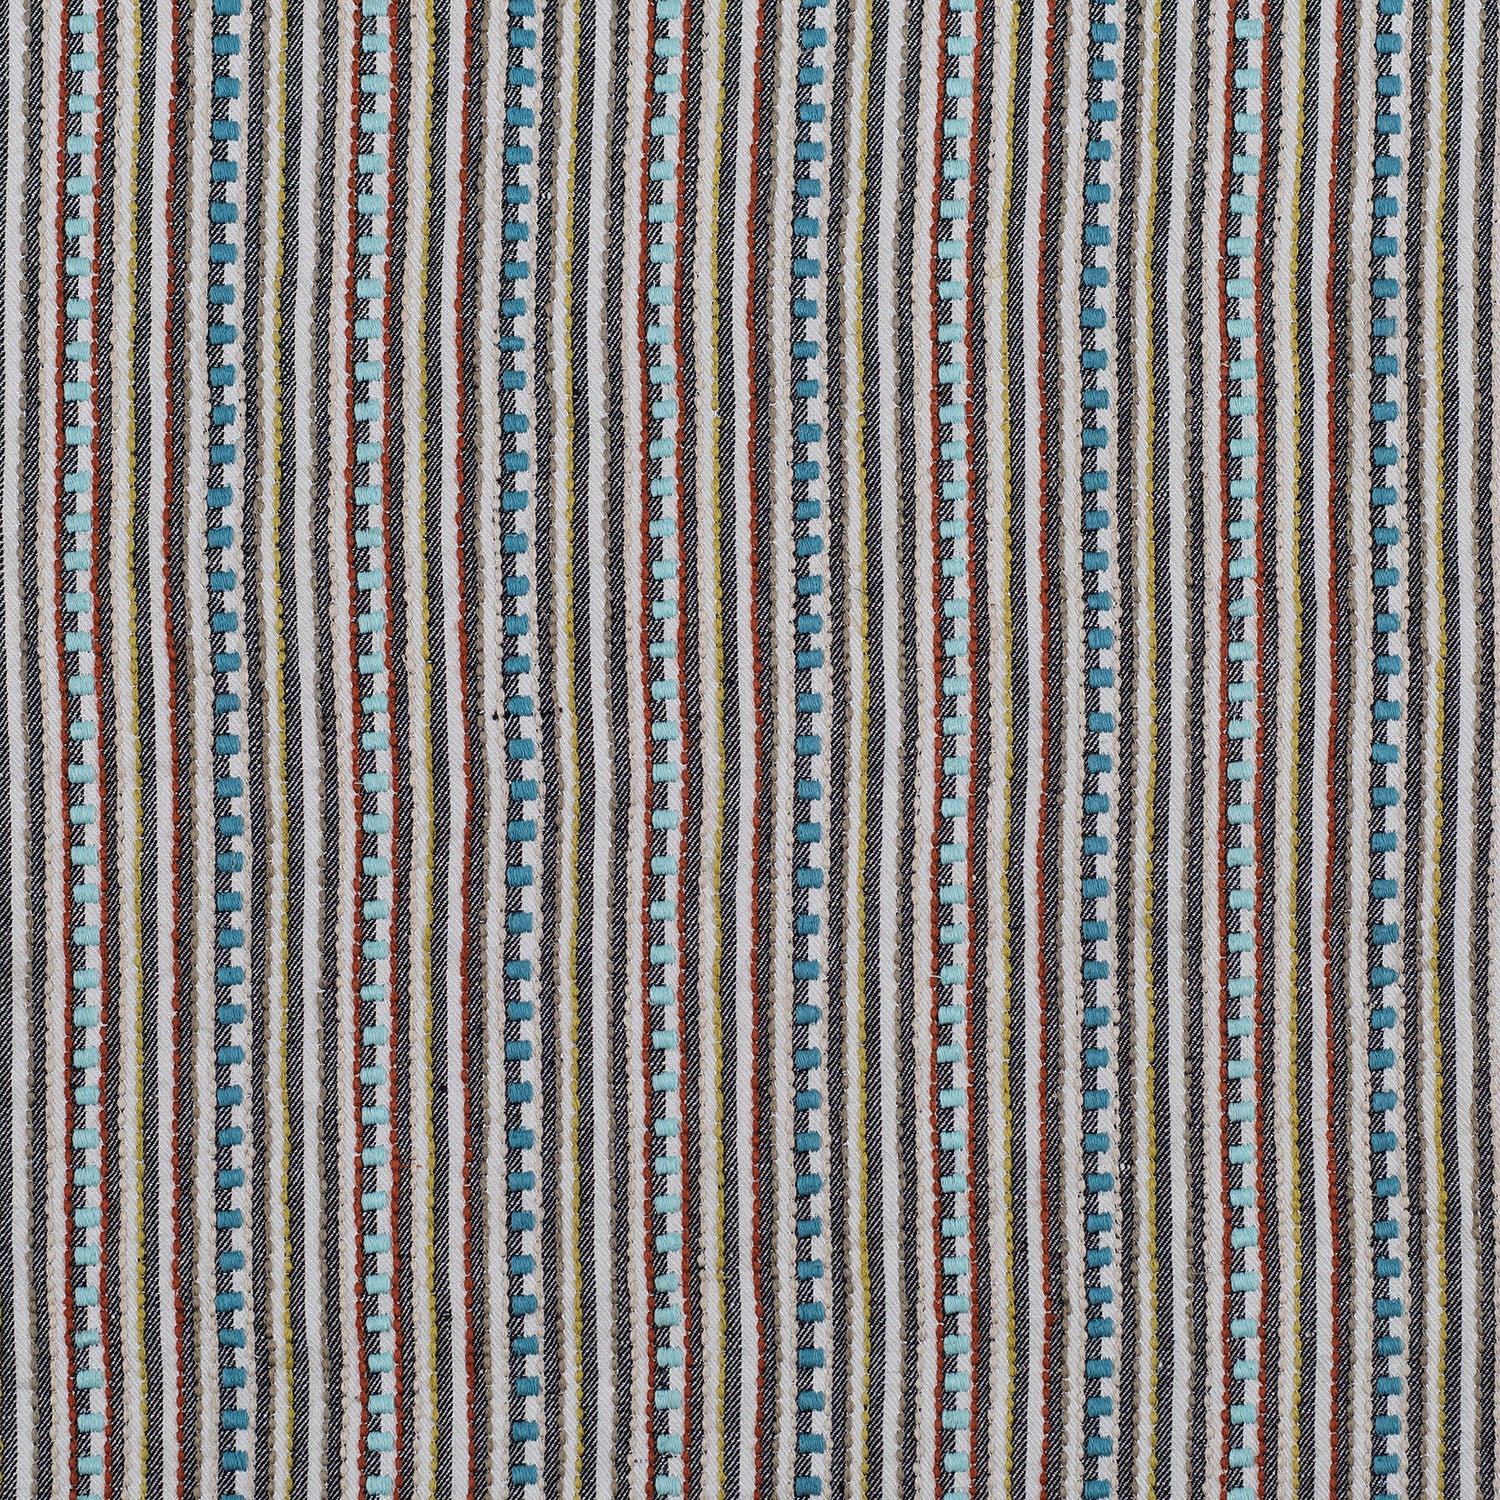 Dimensional embroidered fabric in an irregular stripe pattern in shades of blue, brown, red and yellow.